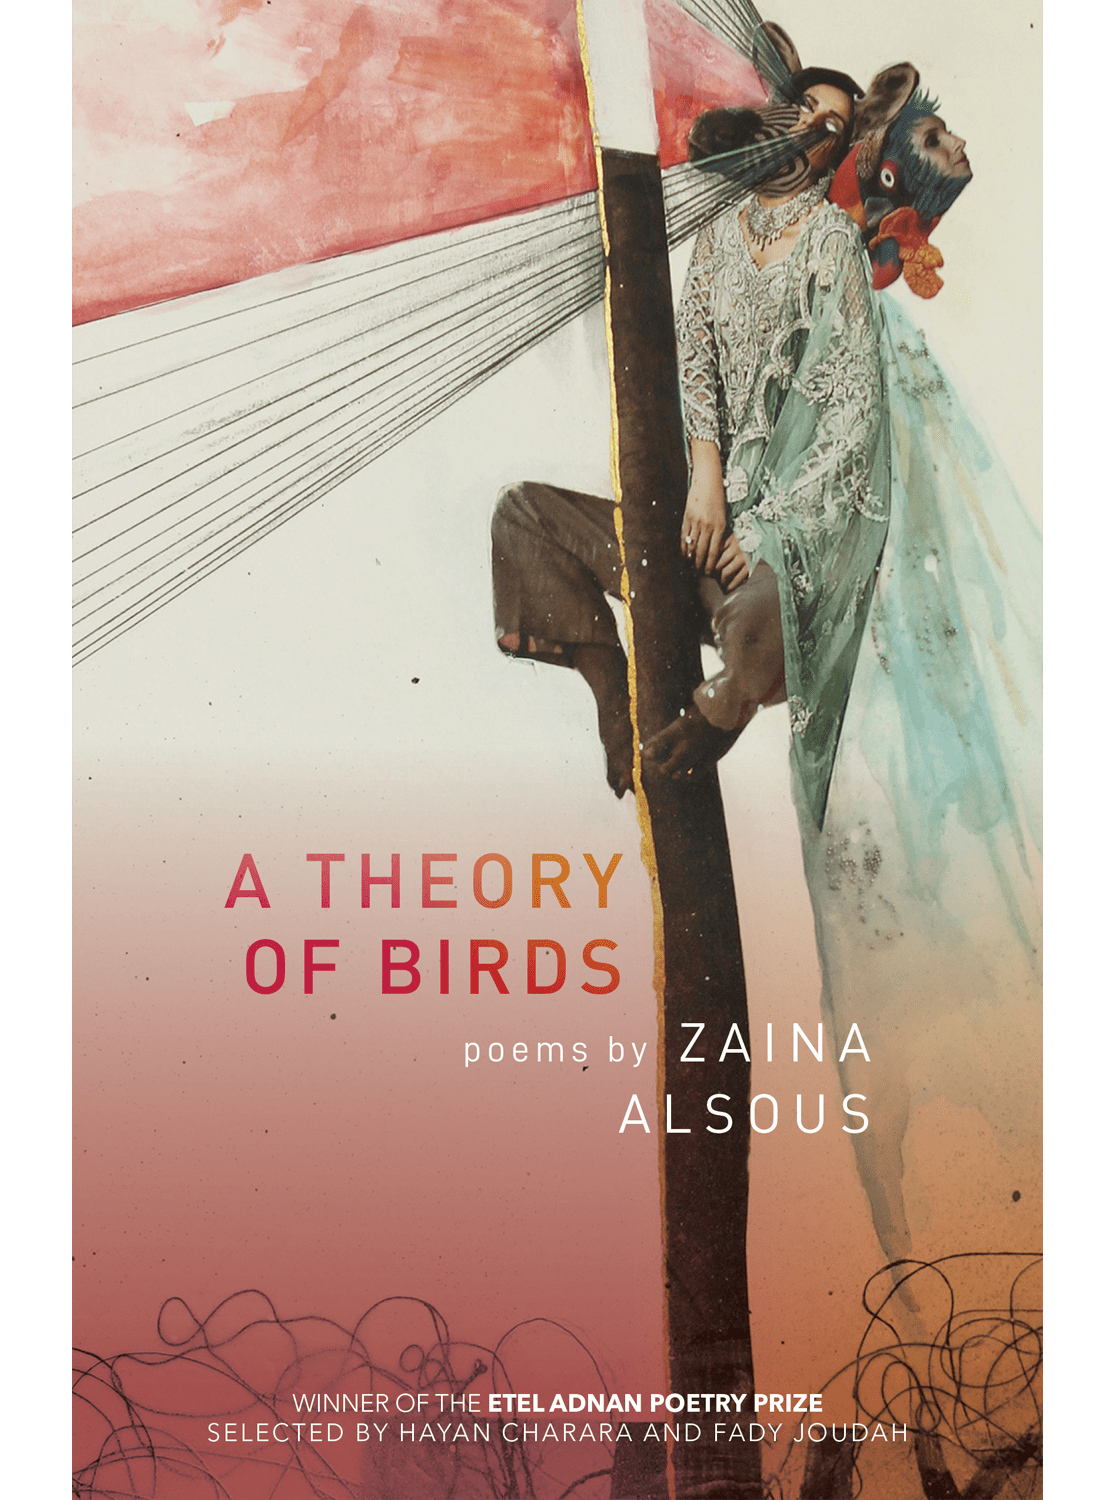 A Theory of Birds book jacket